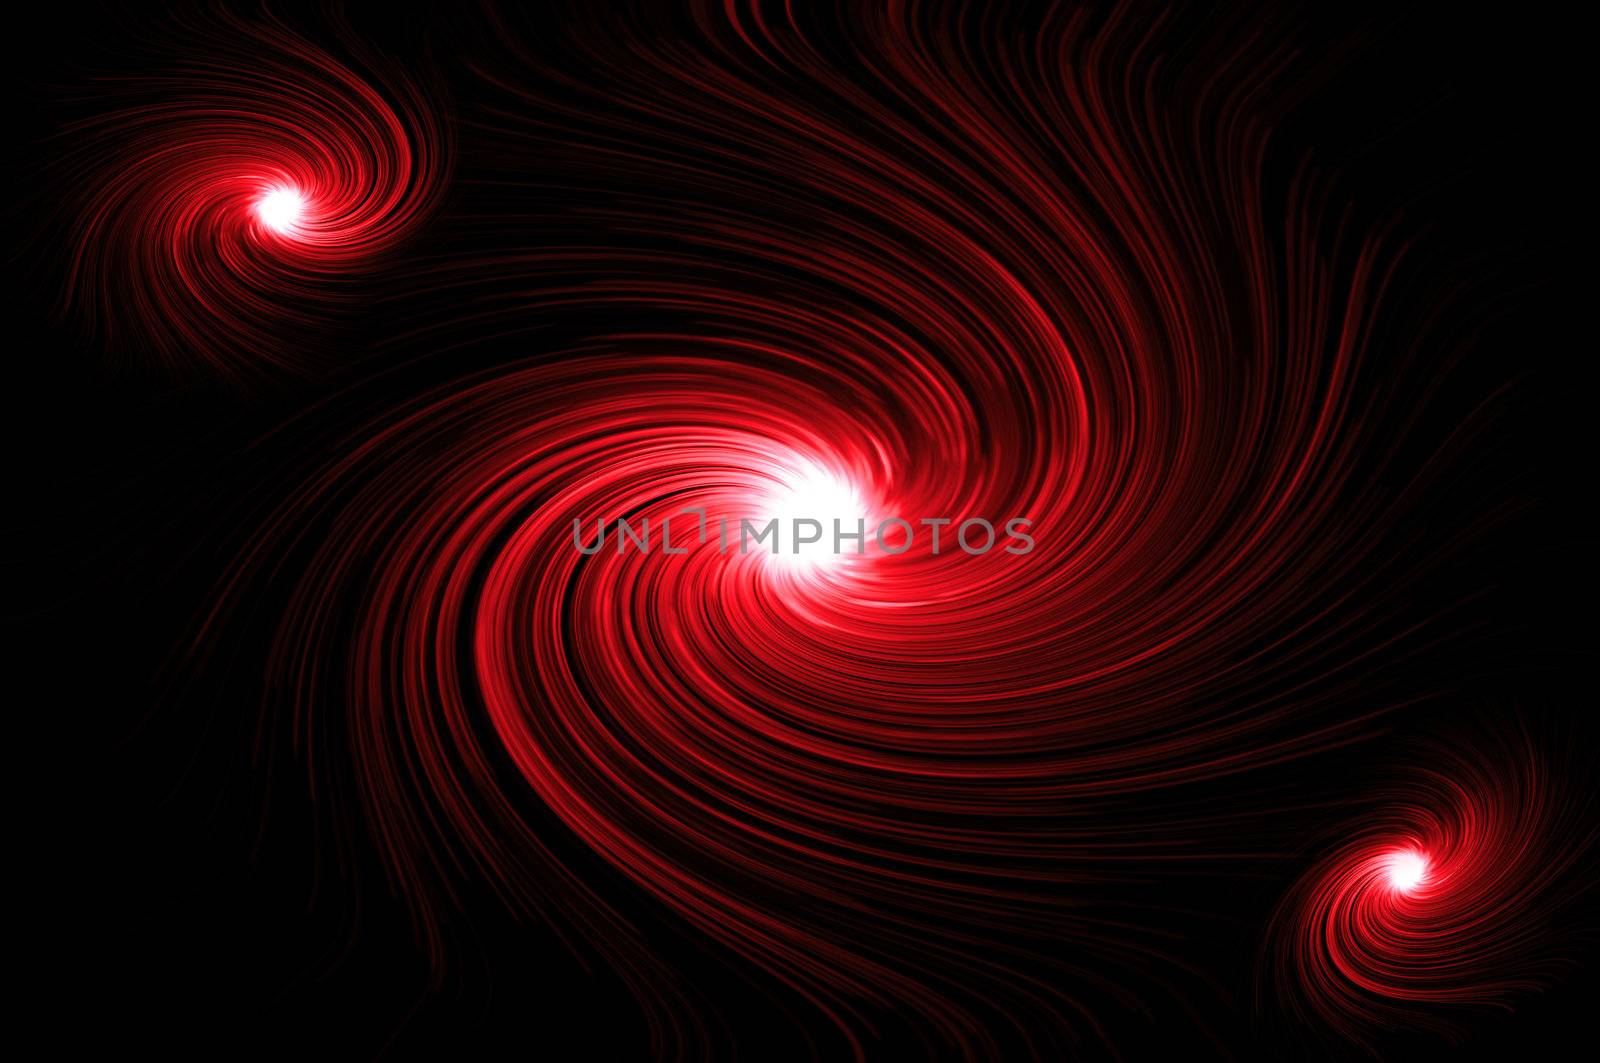 Vibrant red swirls by 72soul